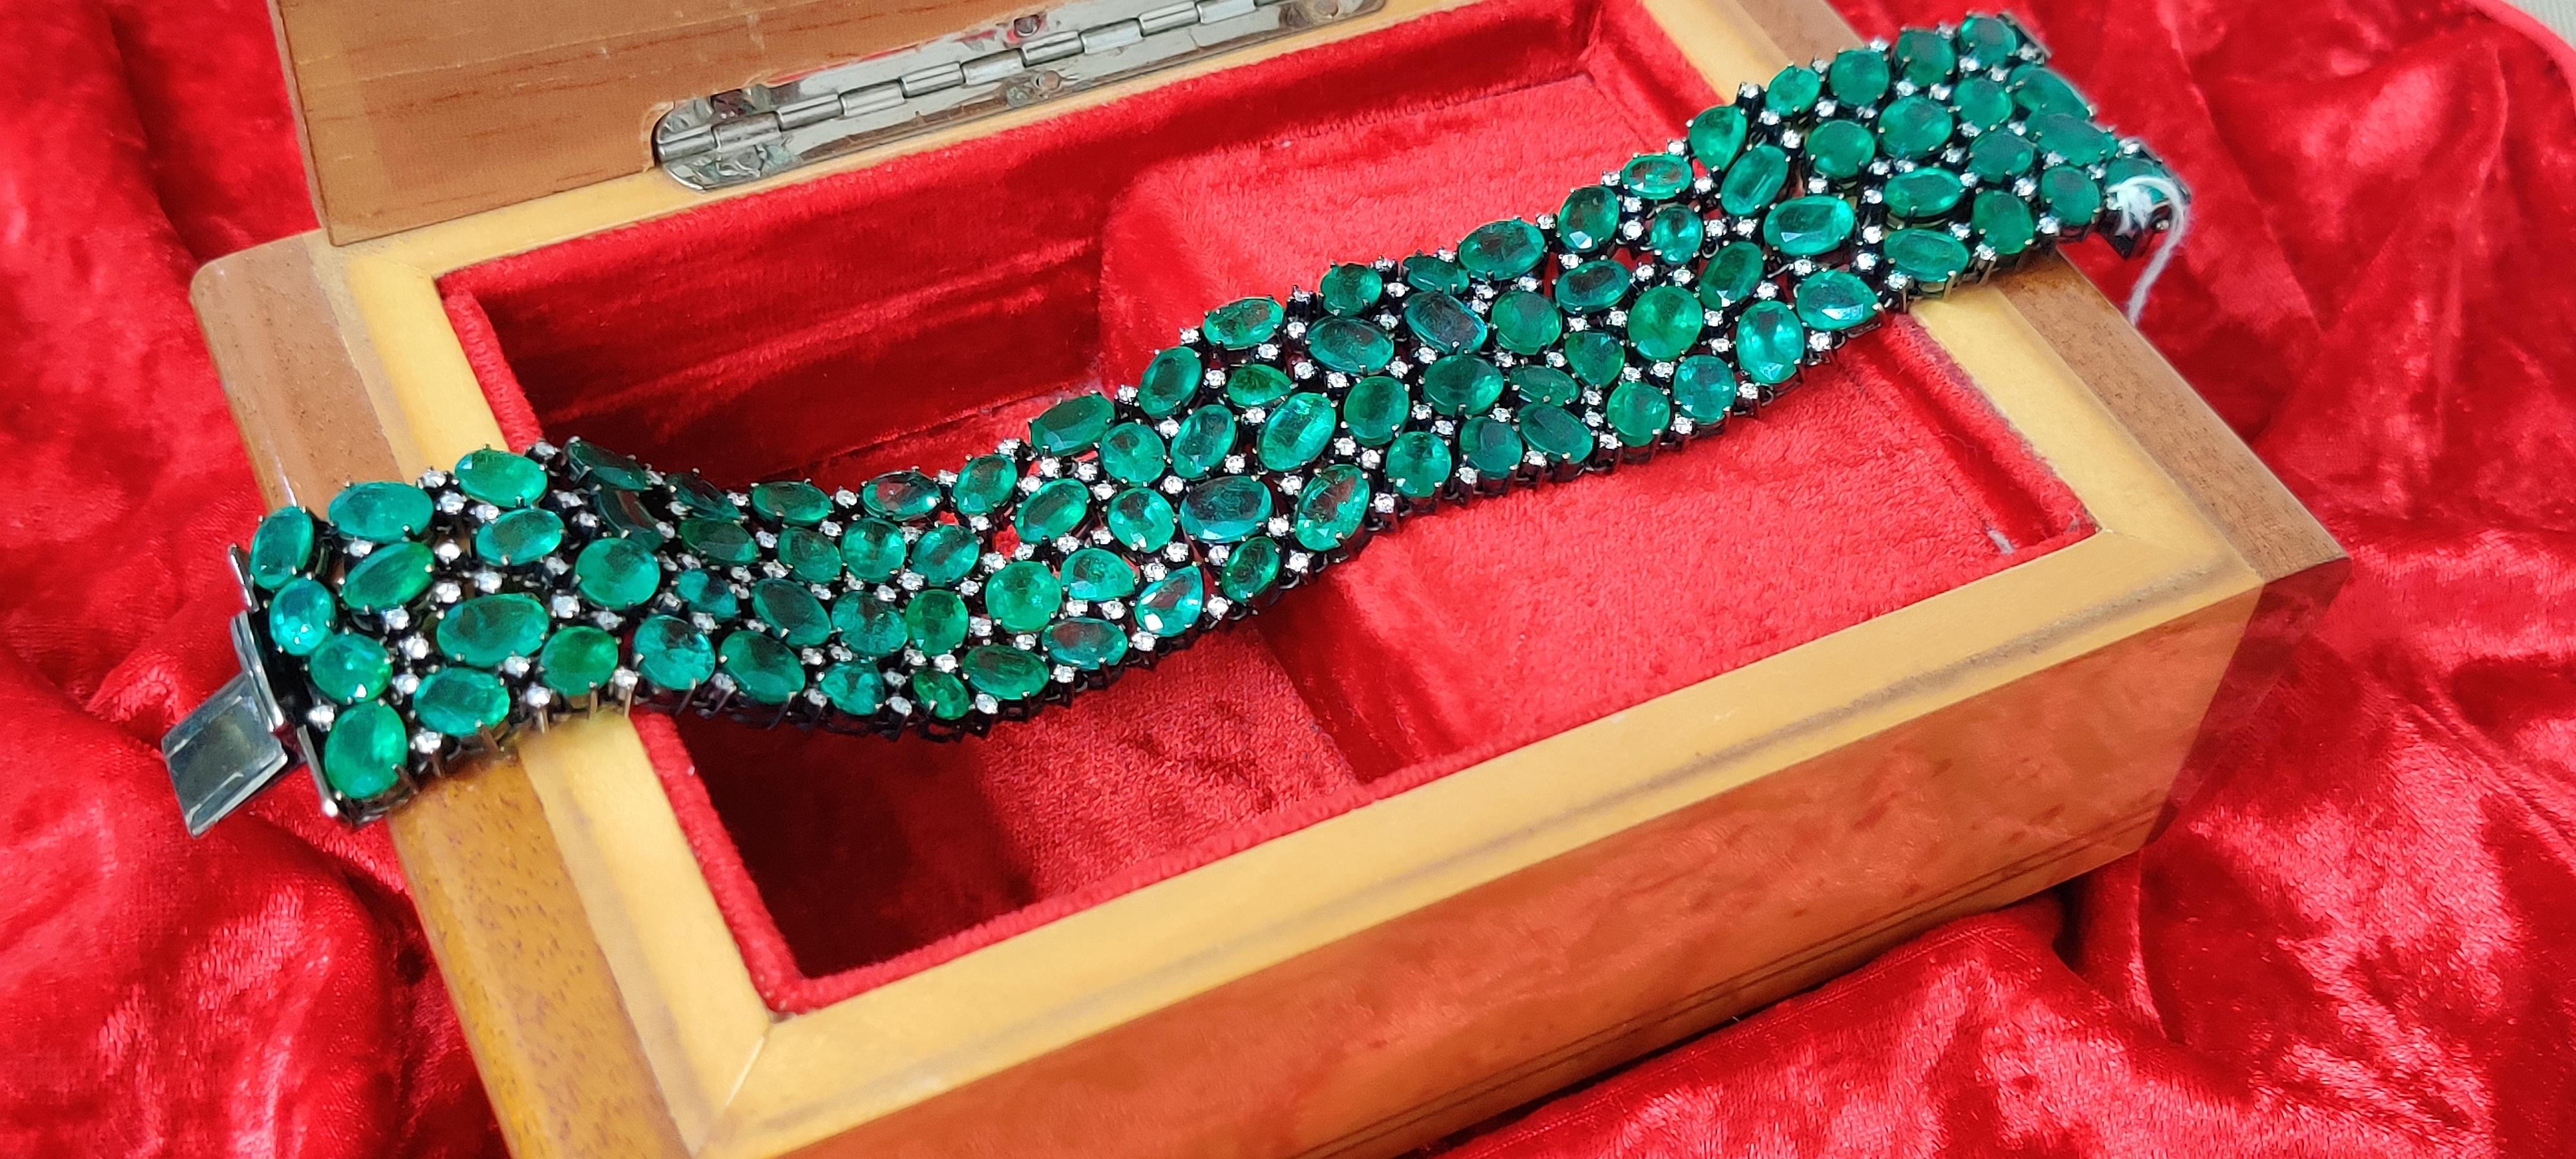 115.21 Ct Zambian Emerald studded Contemporary Statement Bracelet in 18K Gold For Sale 1